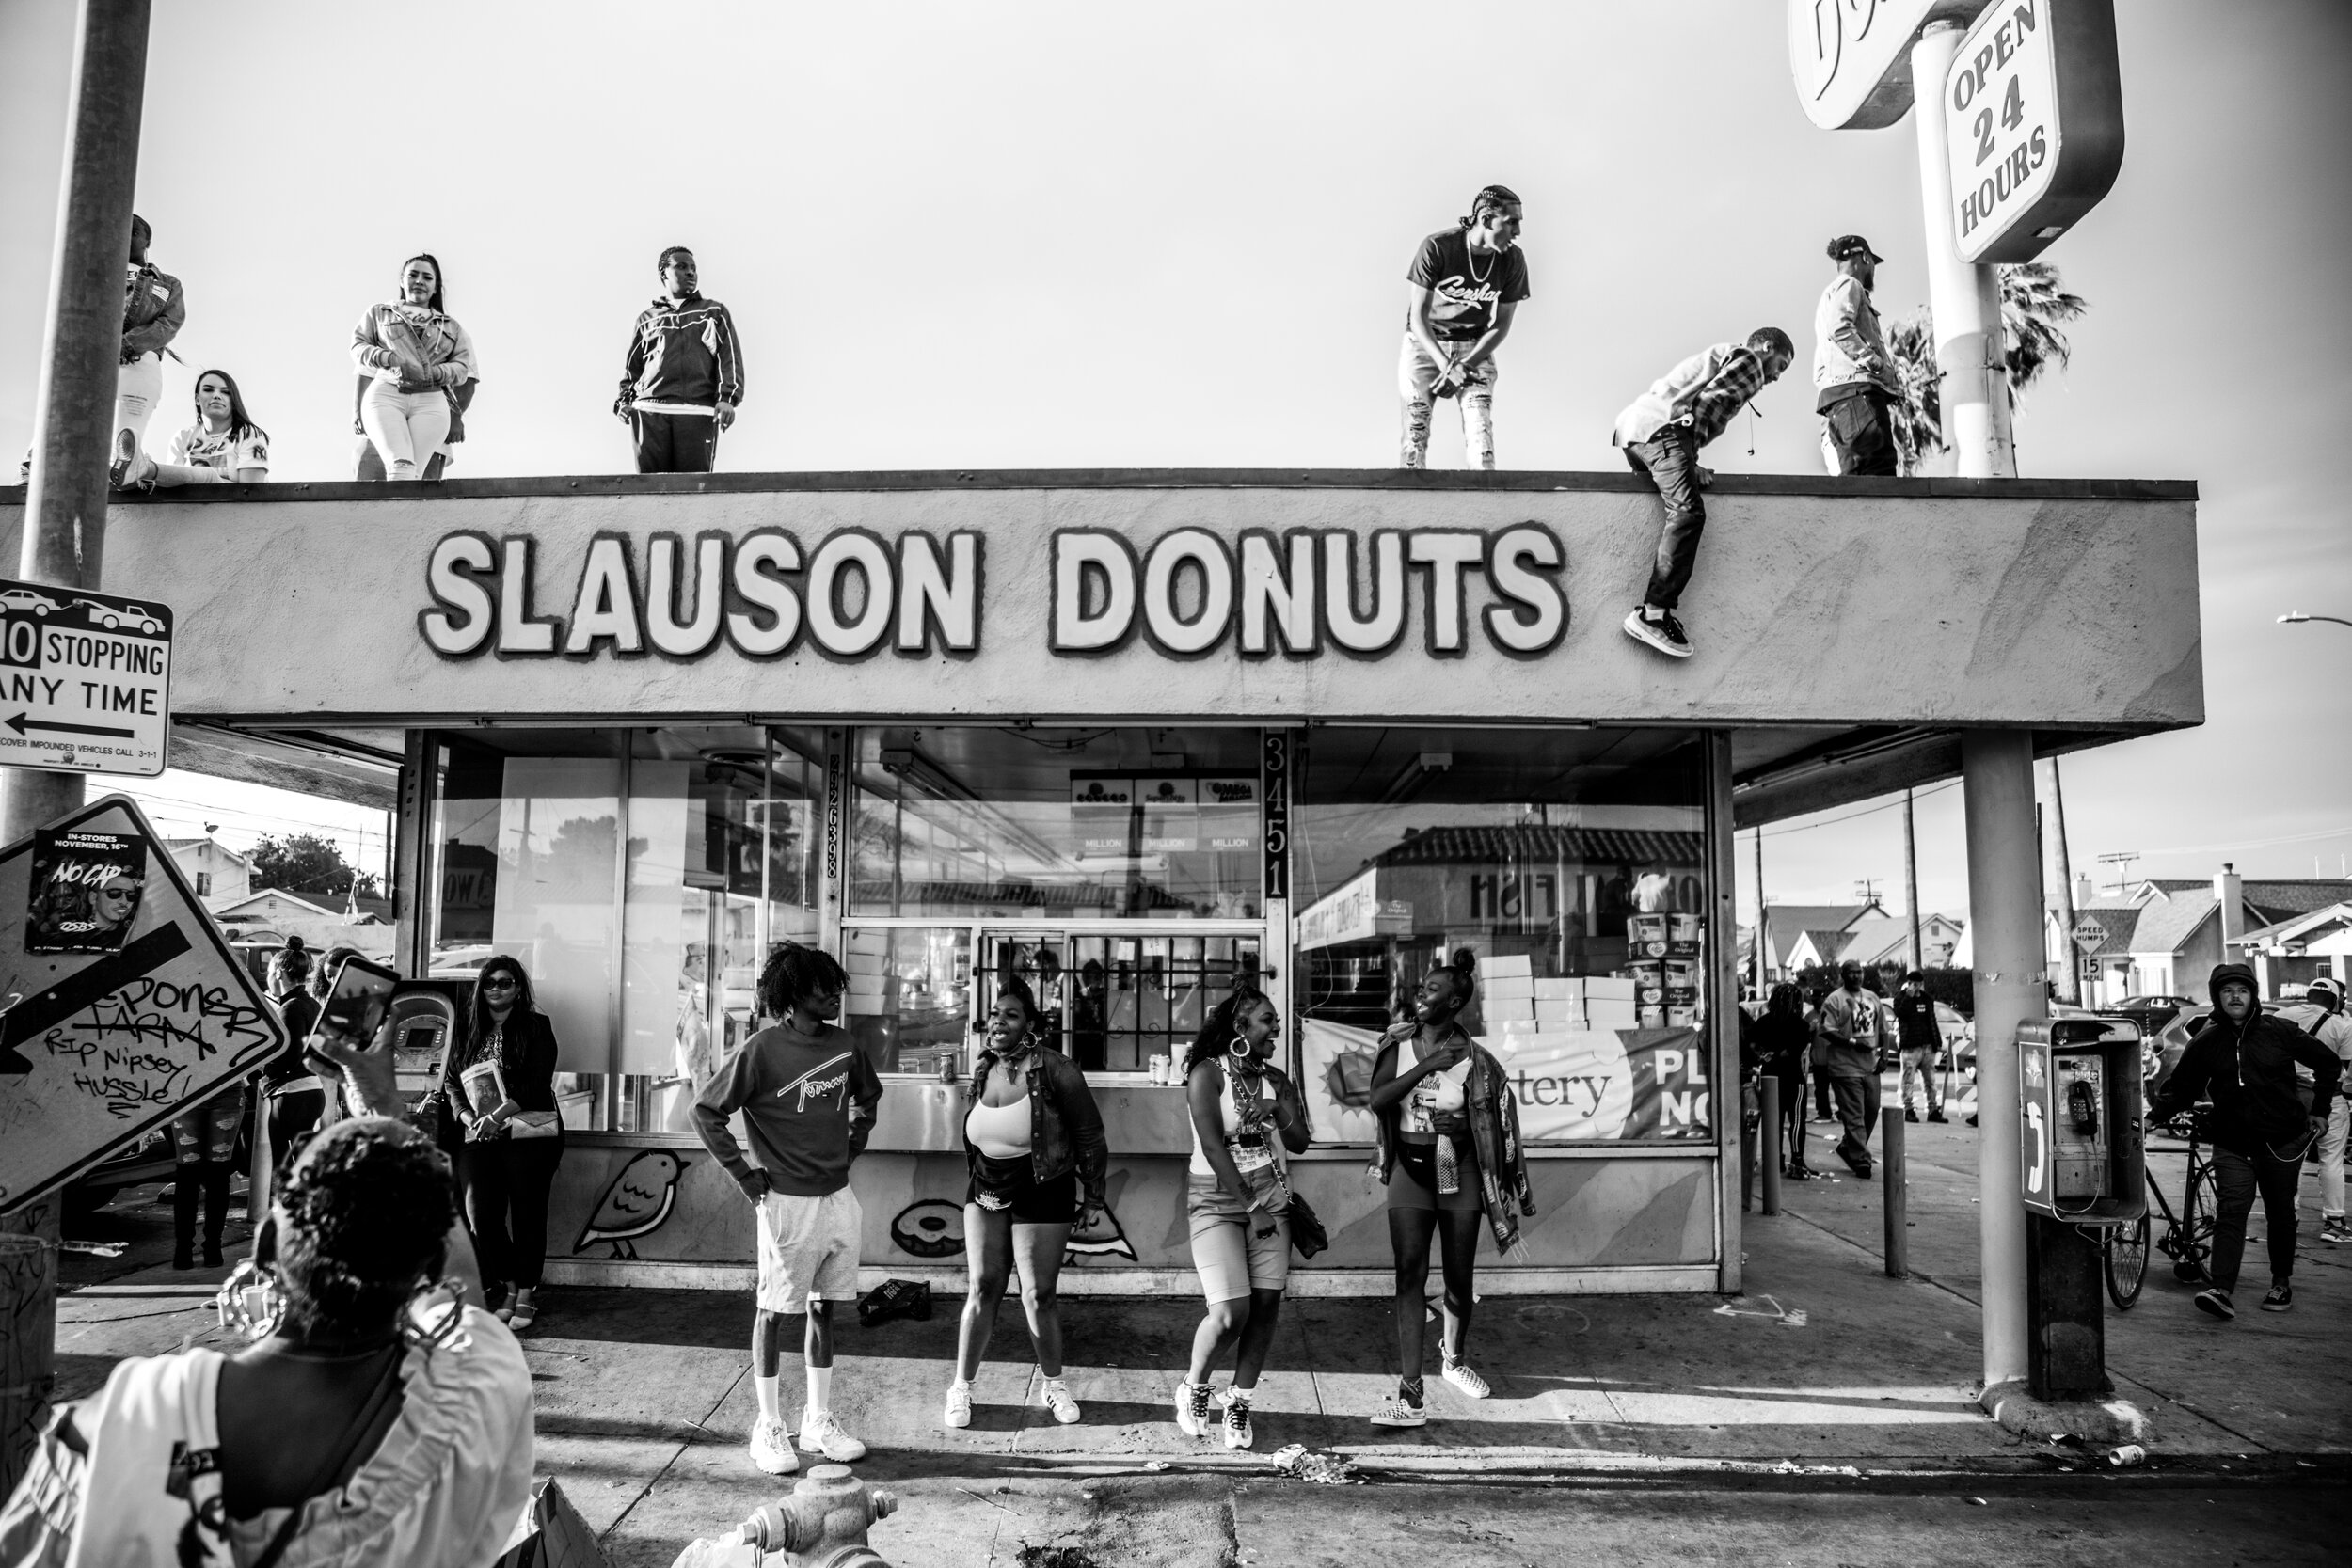  Fans and community members take it all in from the top of the Slauson Donuts building, located across the street from The Marathon Clothing Store. 